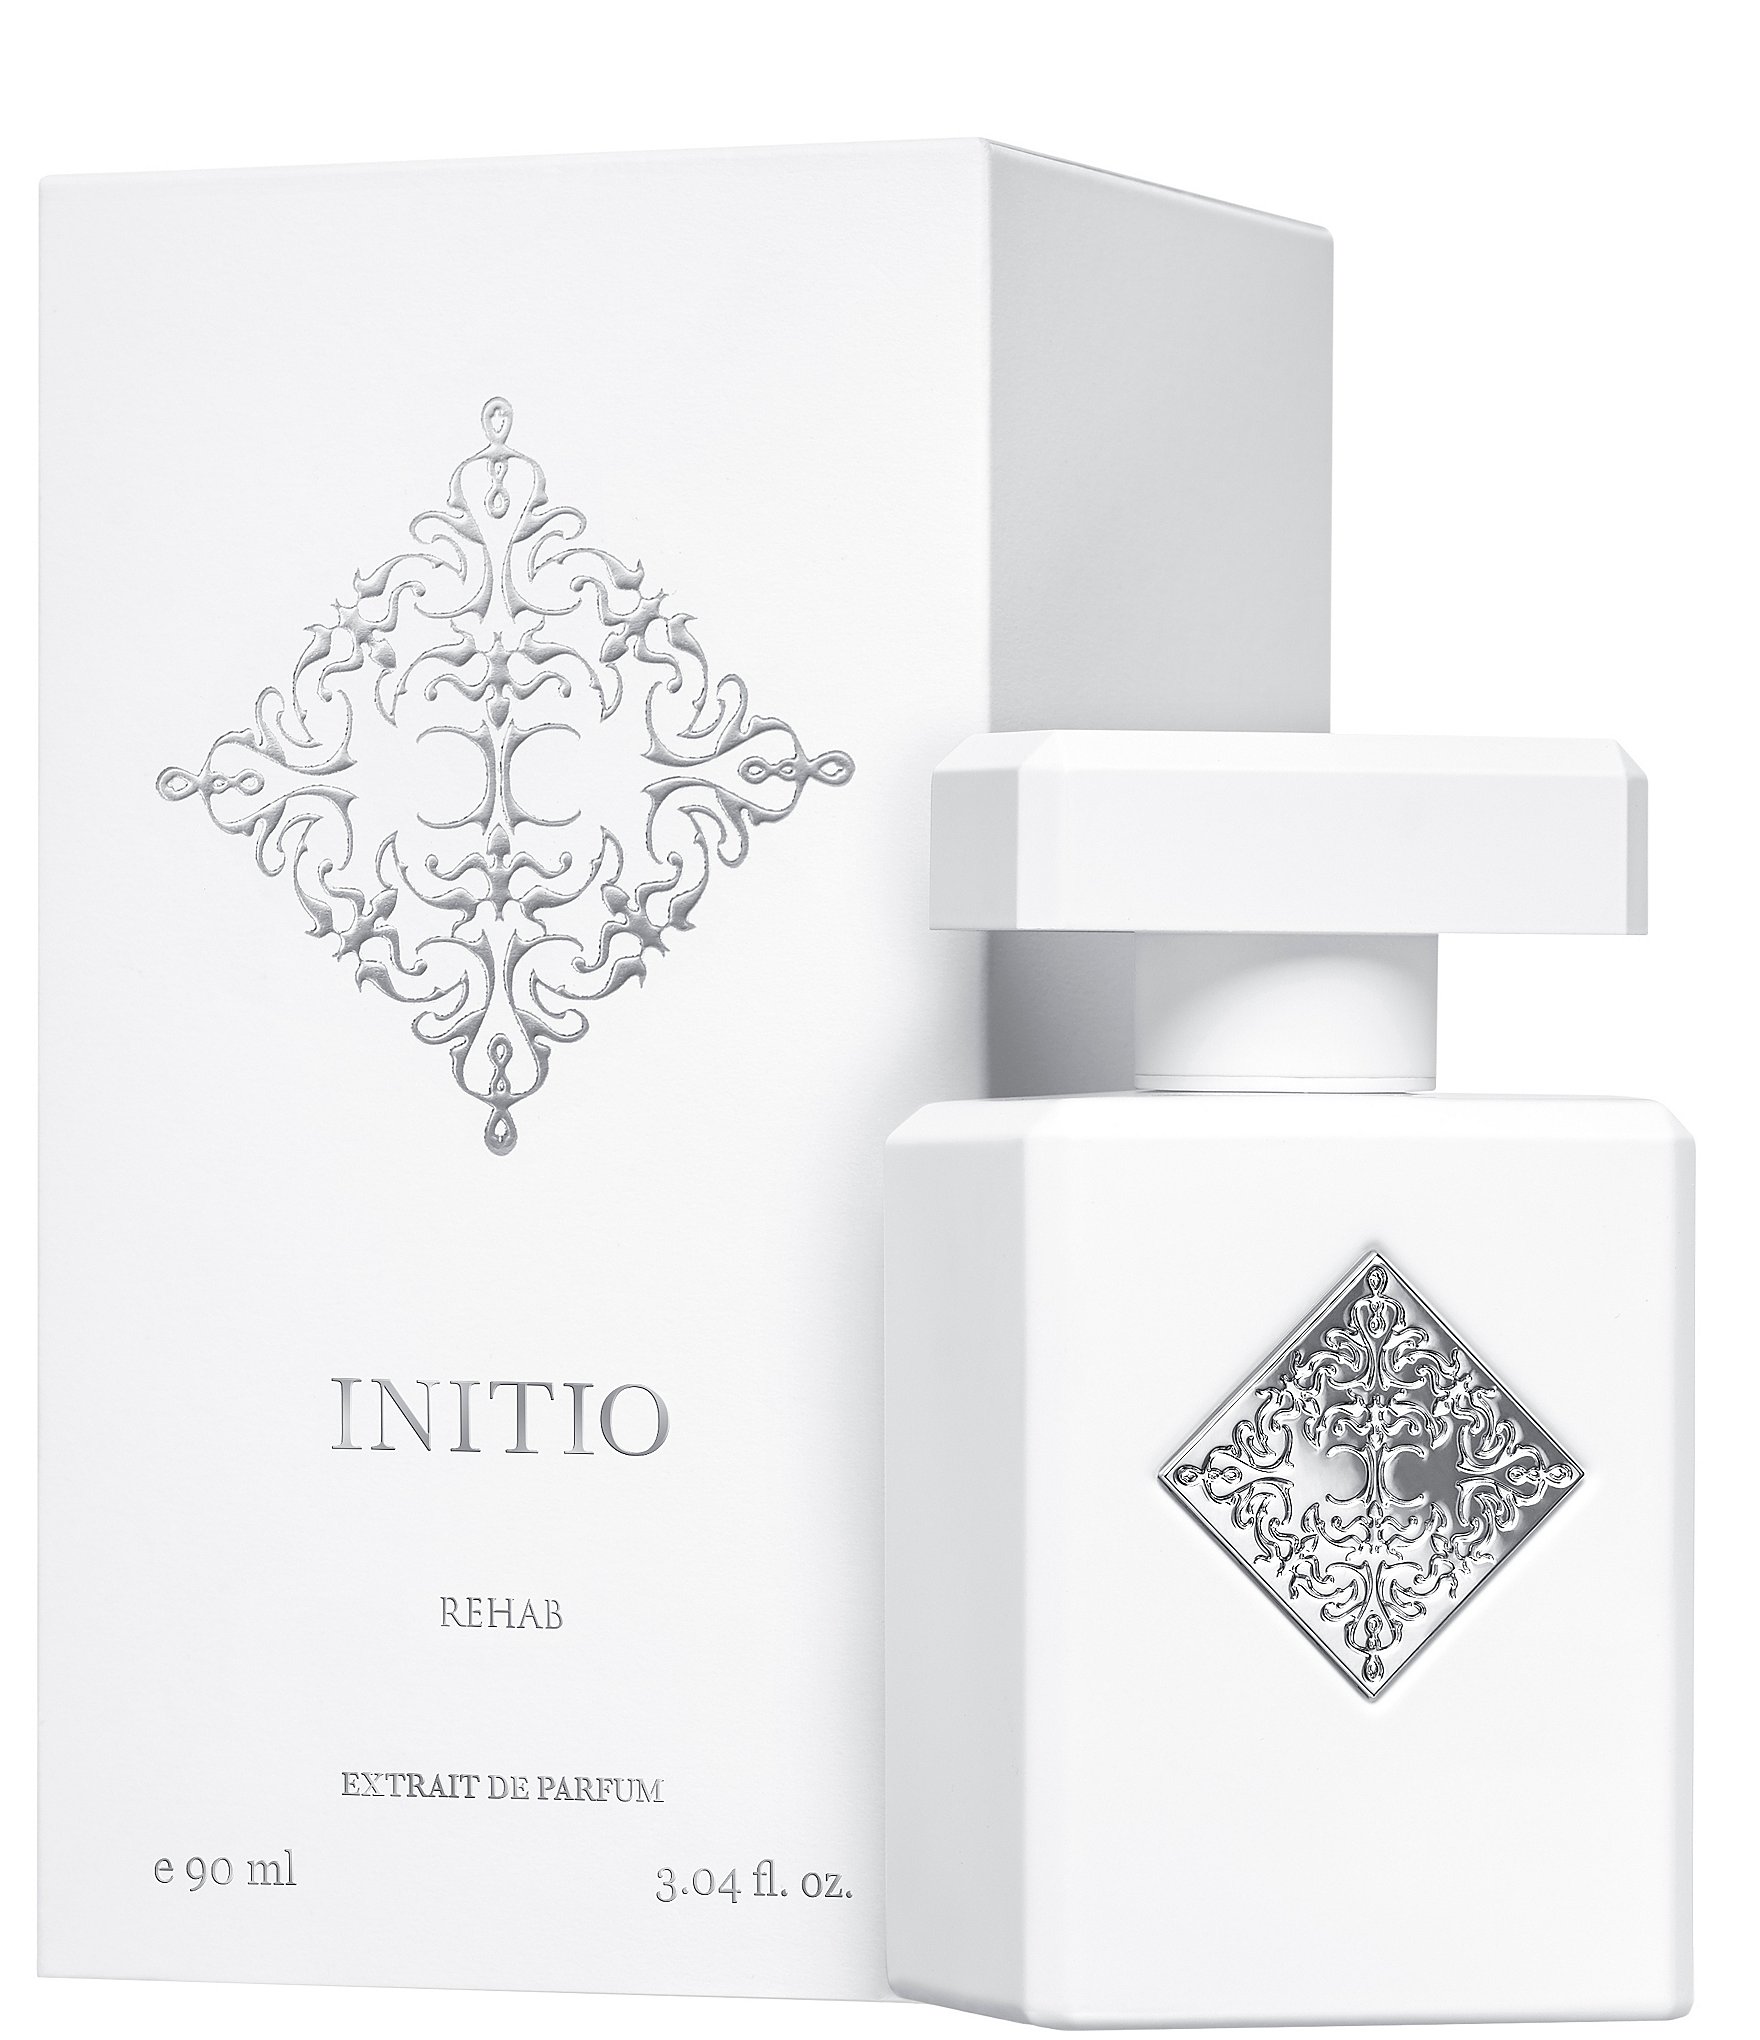 Initio prives rehab. Духи Initio Parfums prives Rehab. Парфюмерная вода Initio Rehab, 90 мл. Initio Parfums prives Paragon. Initio Paragon Парфюм.